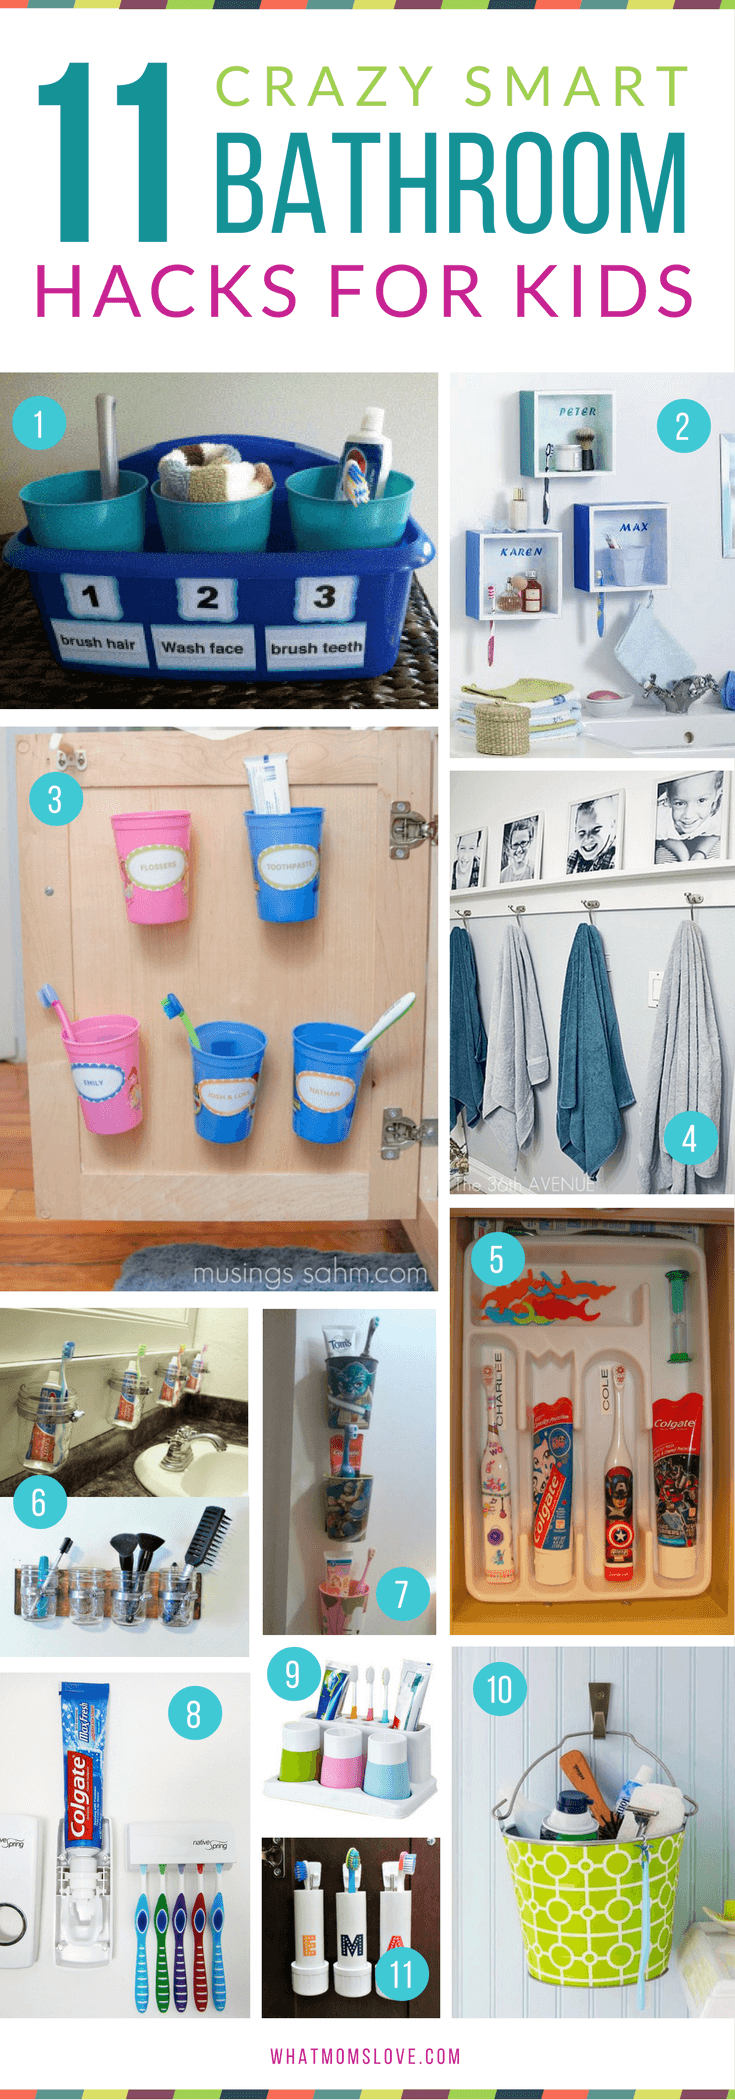 Genius Hacks for an Organized Bathroom | Hacks, Tips and Tricks for Organized, Stress-Free Mornings with kids